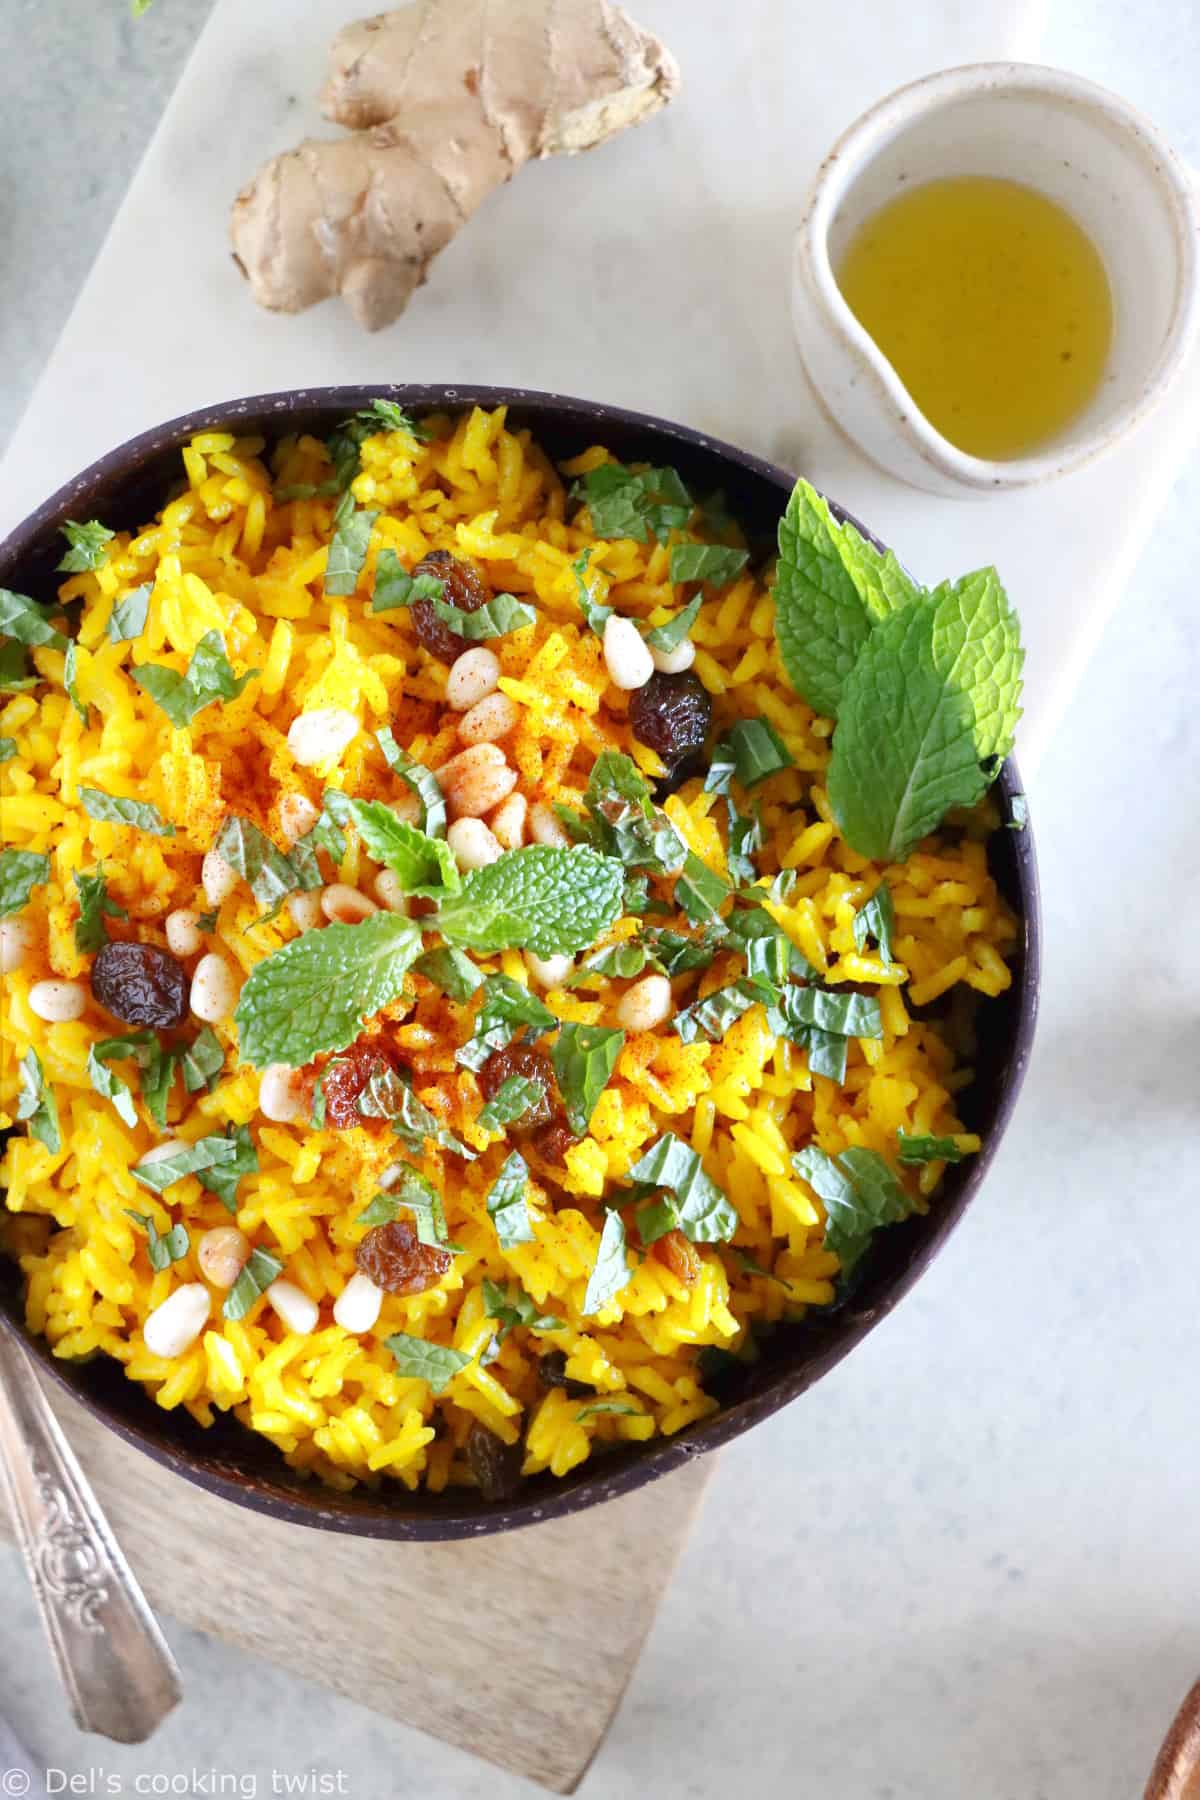 With its warm spices and substantial aromas, this easy ginger turmeric rice is a lovely side or base to grain bowls and salads.